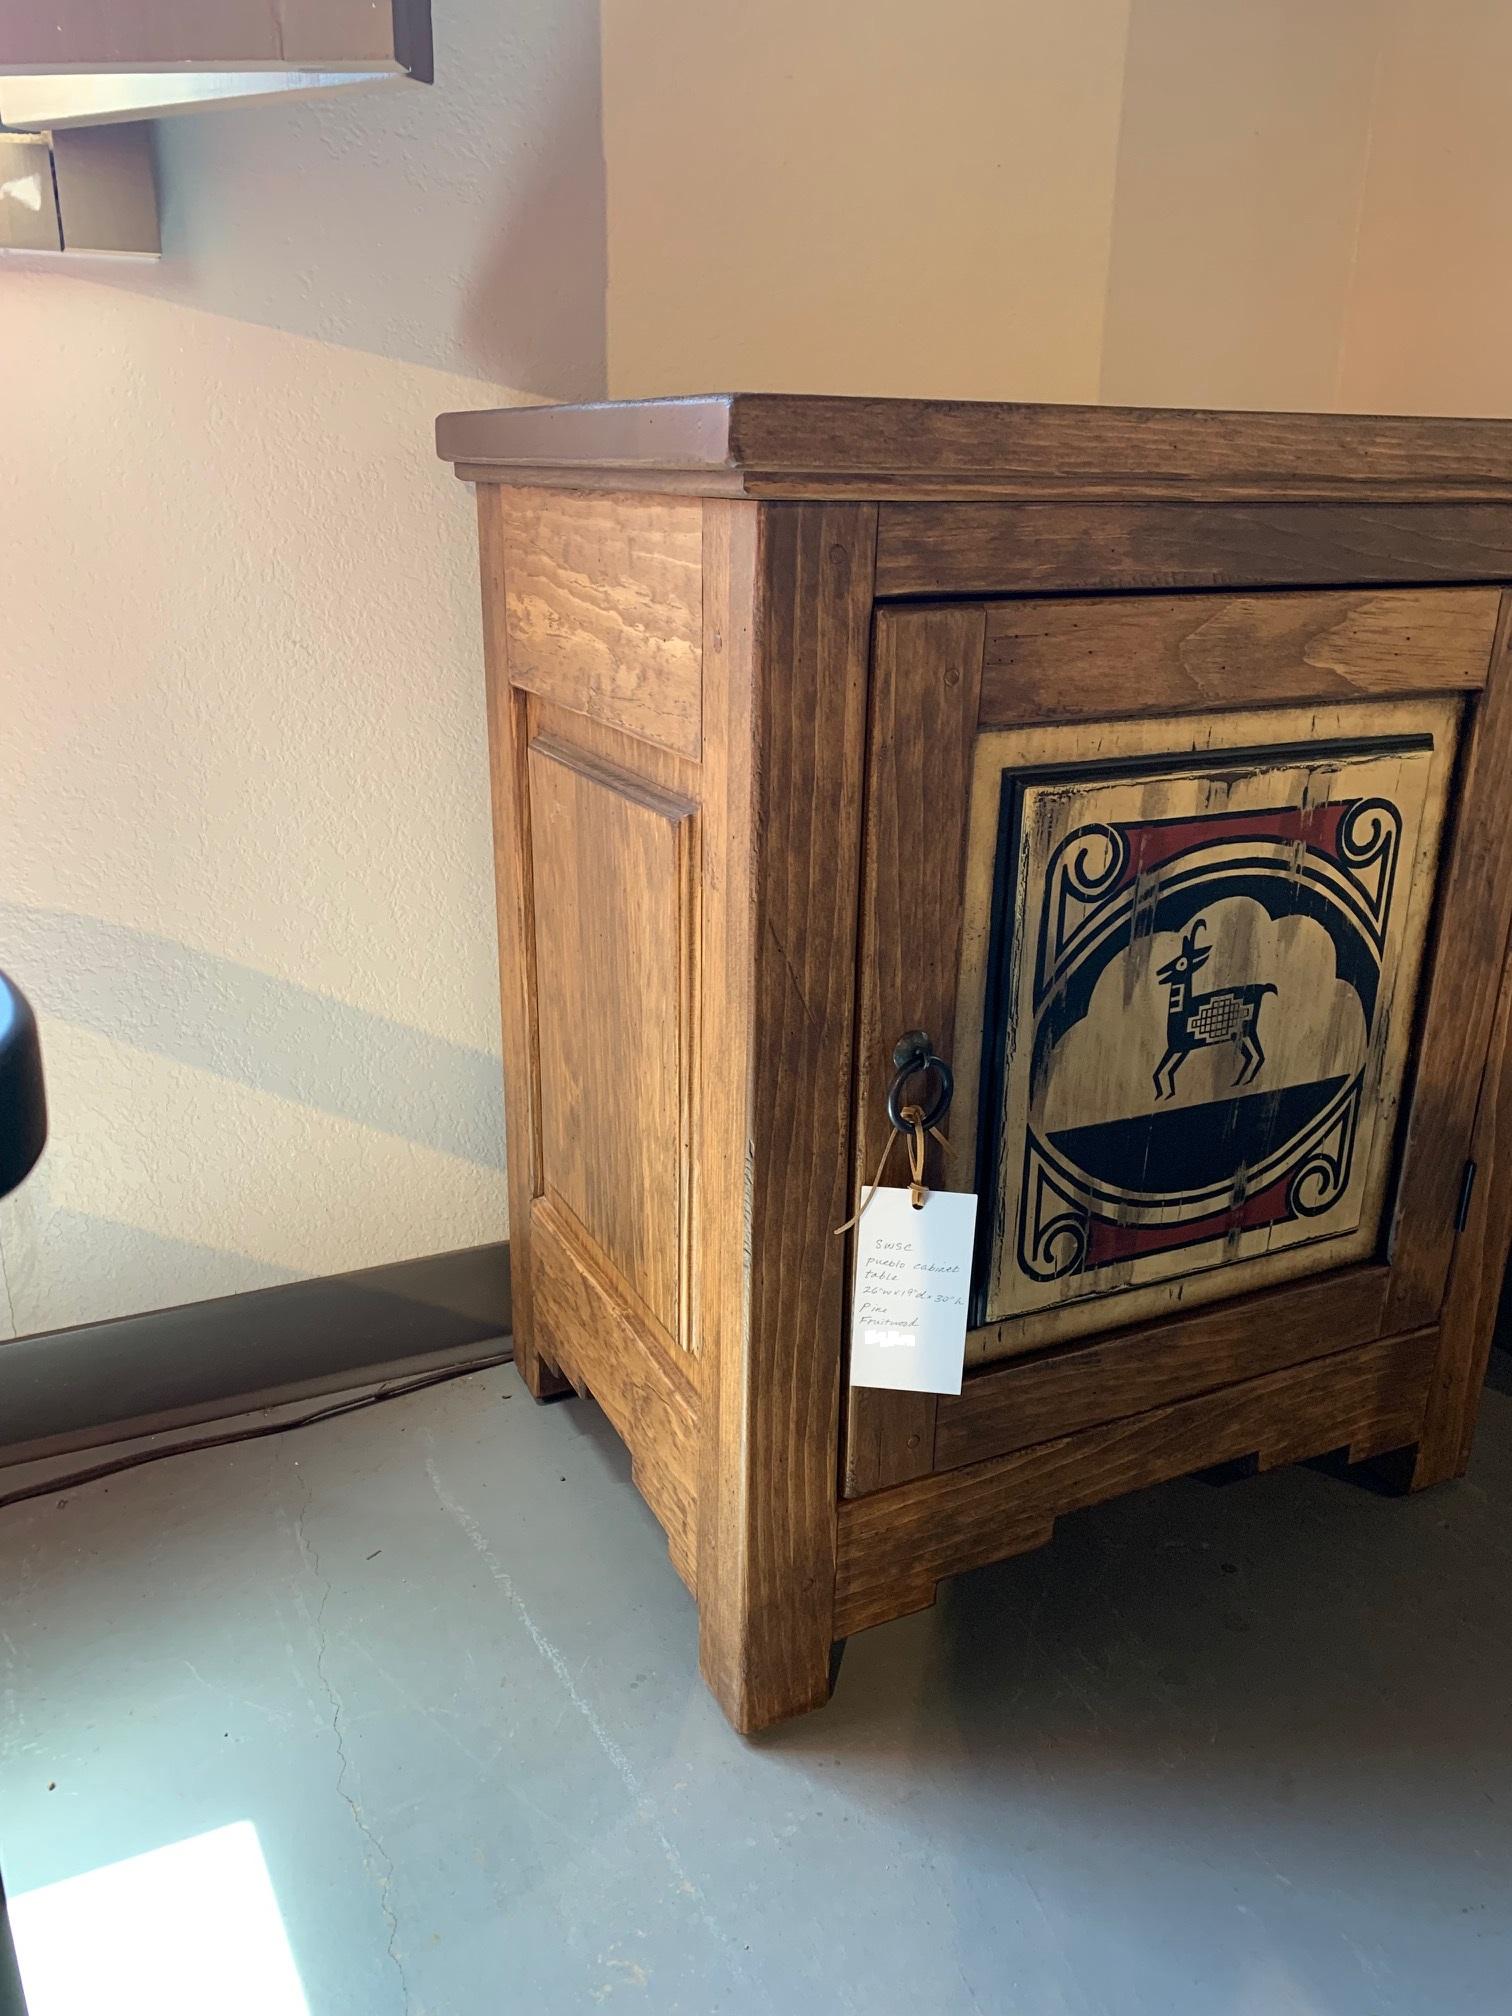 Southwest Spanish Craftsmen Pueblo Cabinet.
Perfect addition to any space. Shelf storage behind single door.

This is a showroom model in perfect condition.